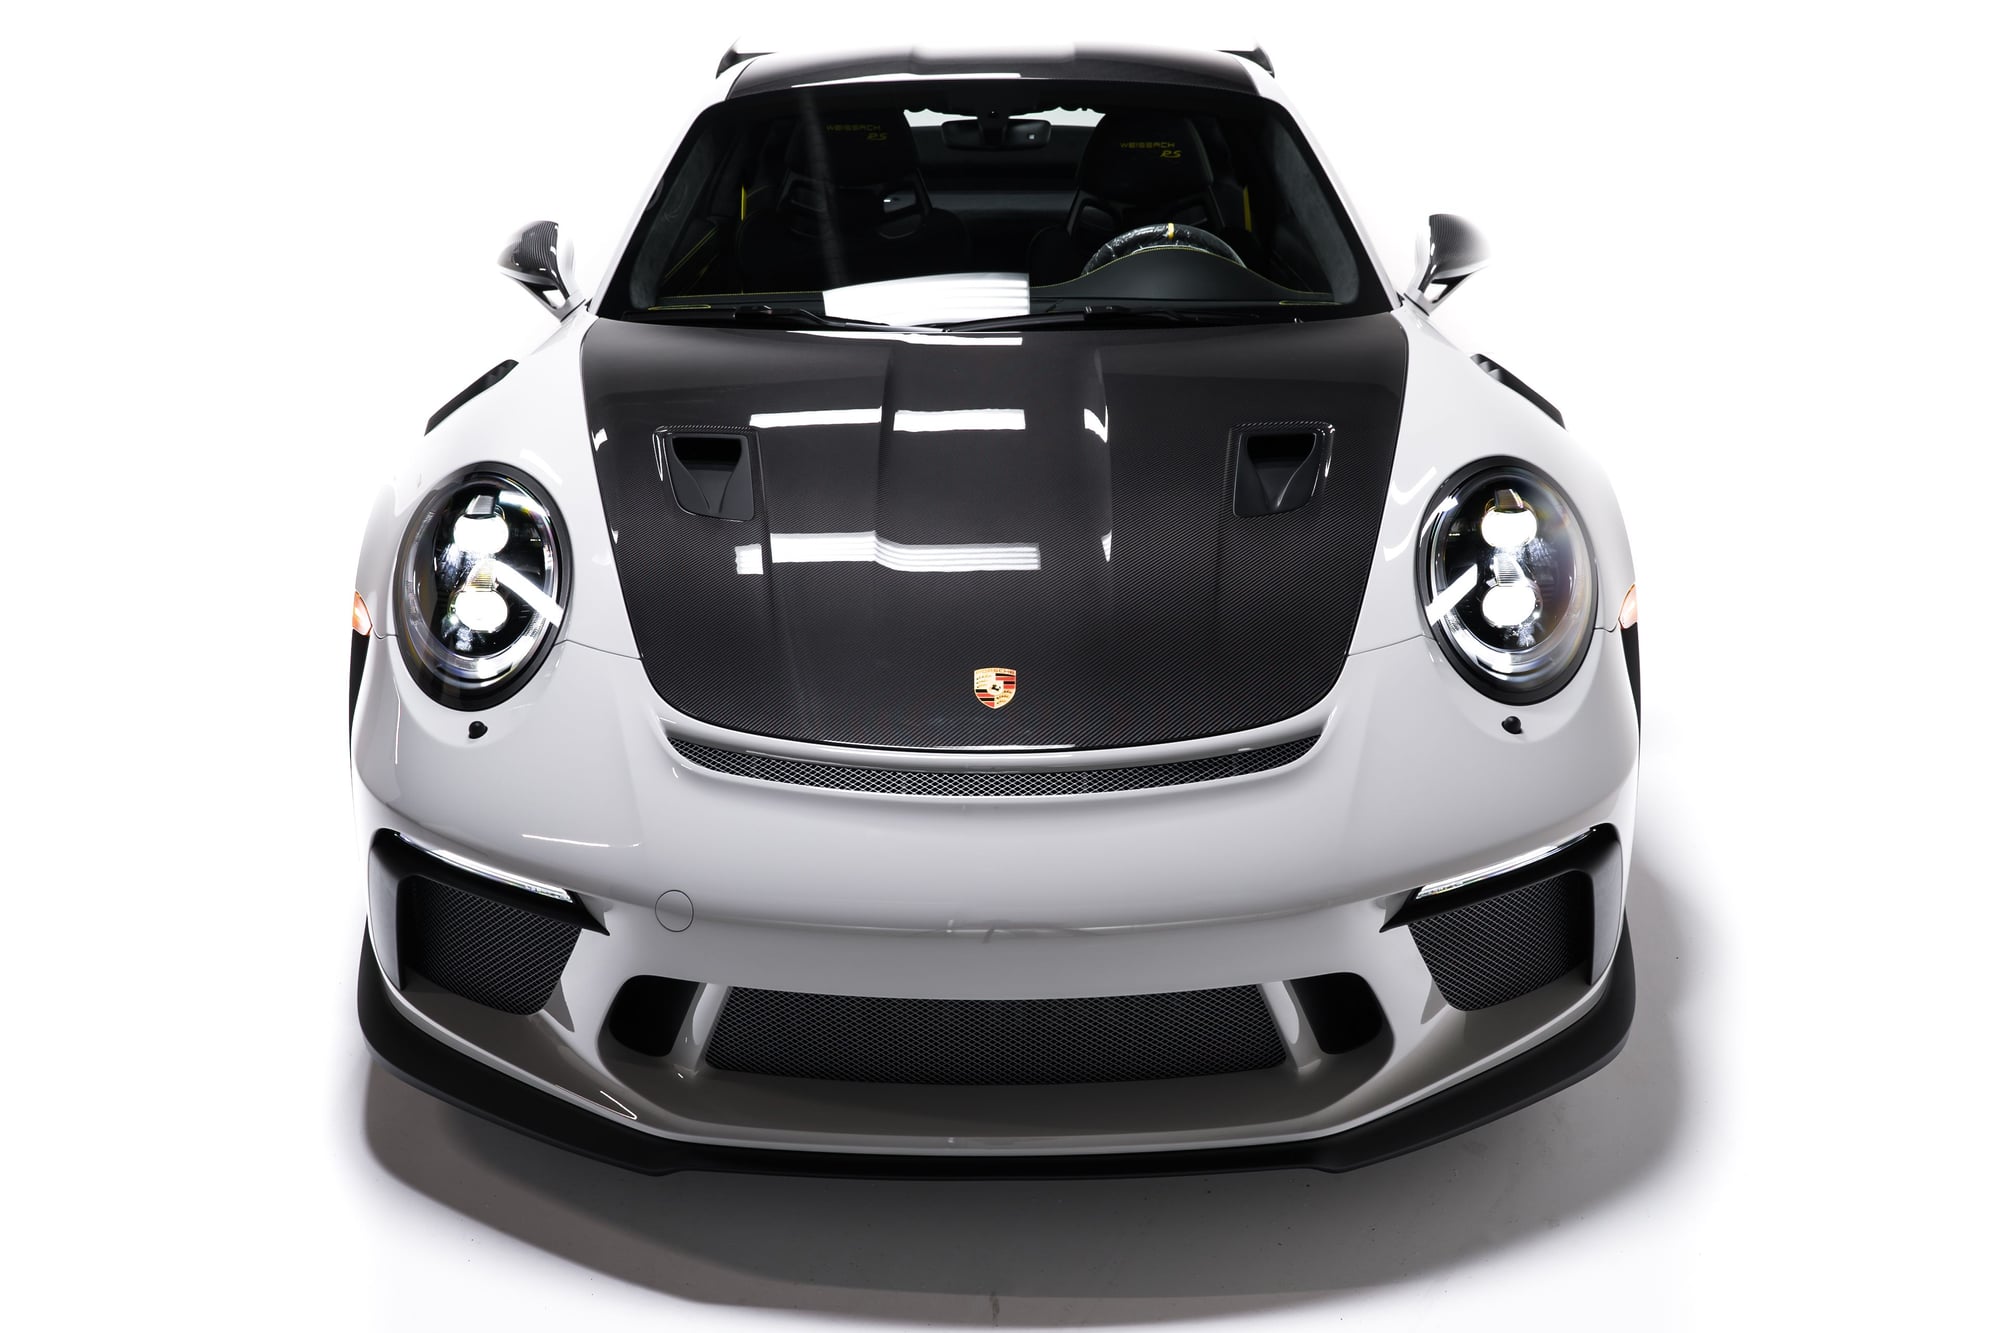 2018 Porsche GT3 - 2019 Chalk GT3RS Weissach w/ Carbon Hood $250k MSRP!! - New - VIN WP0AF2A96KS165389 - 15 Miles - 6 cyl - 2WD - Automatic - Coupe - Other - Murrieta, CA 92562, United States